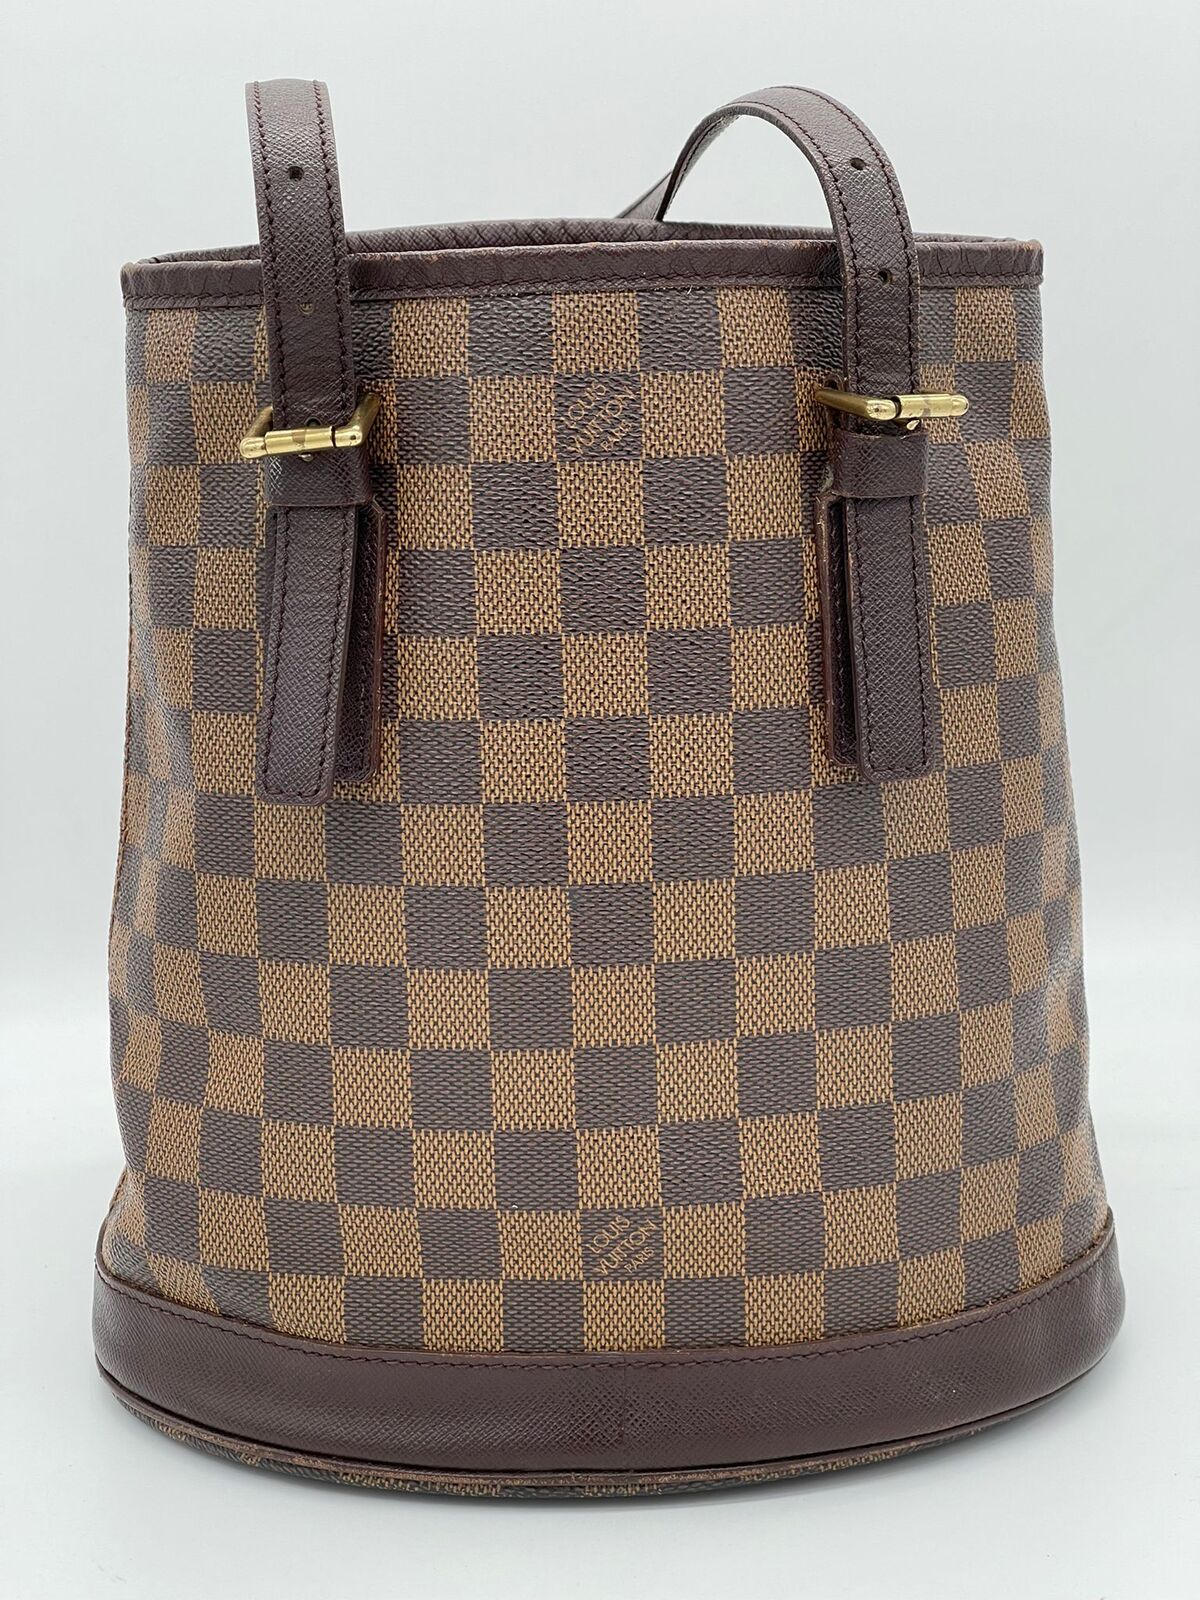 Louis Vuitton Pre-Owned Louis Vuitton Handbags in Pre-Owned